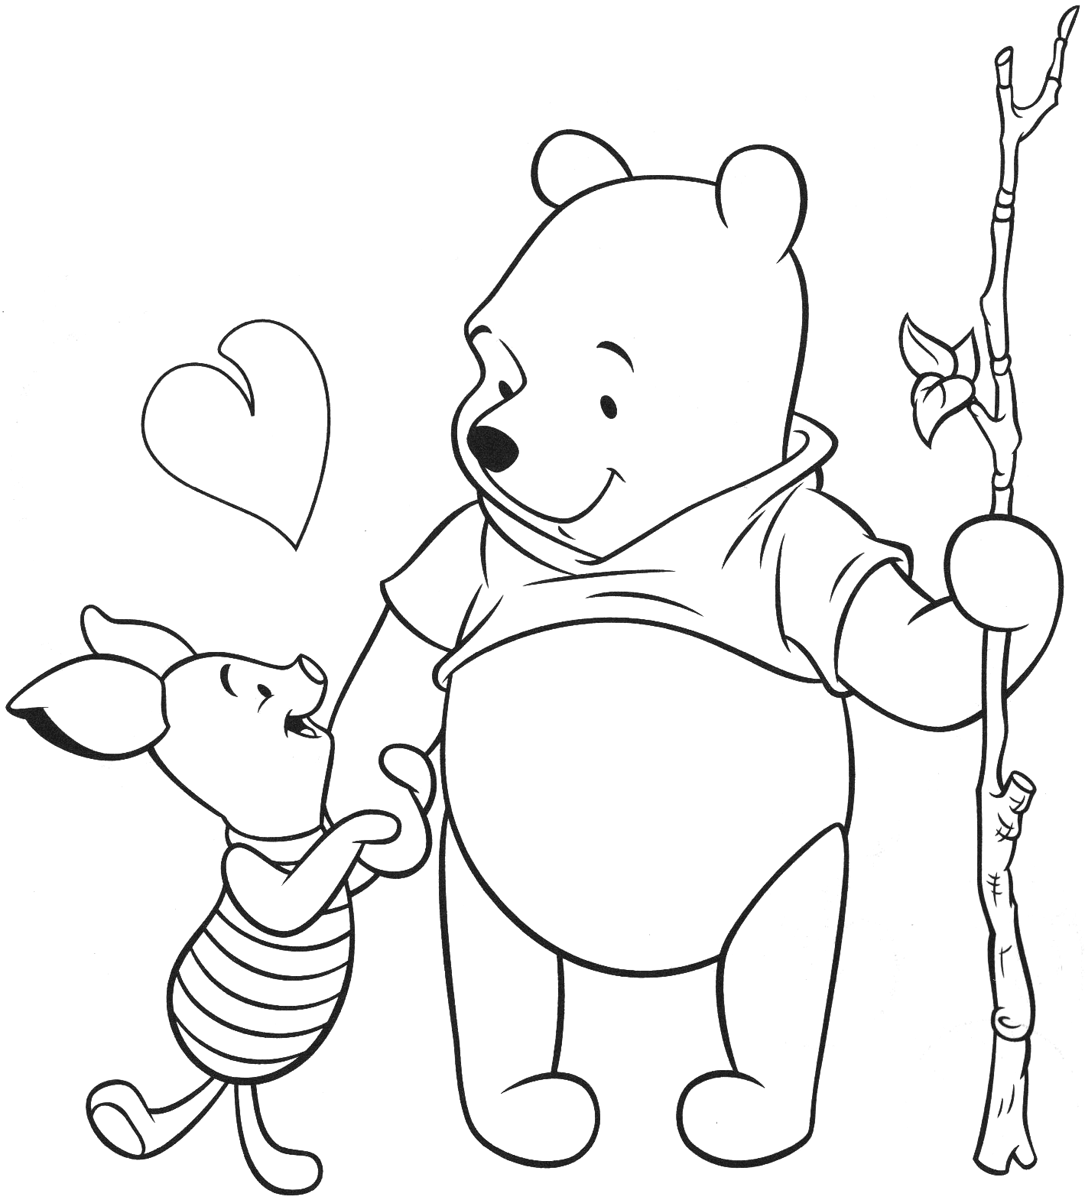 OmaÄ¾ovanky | Coloring pages ...